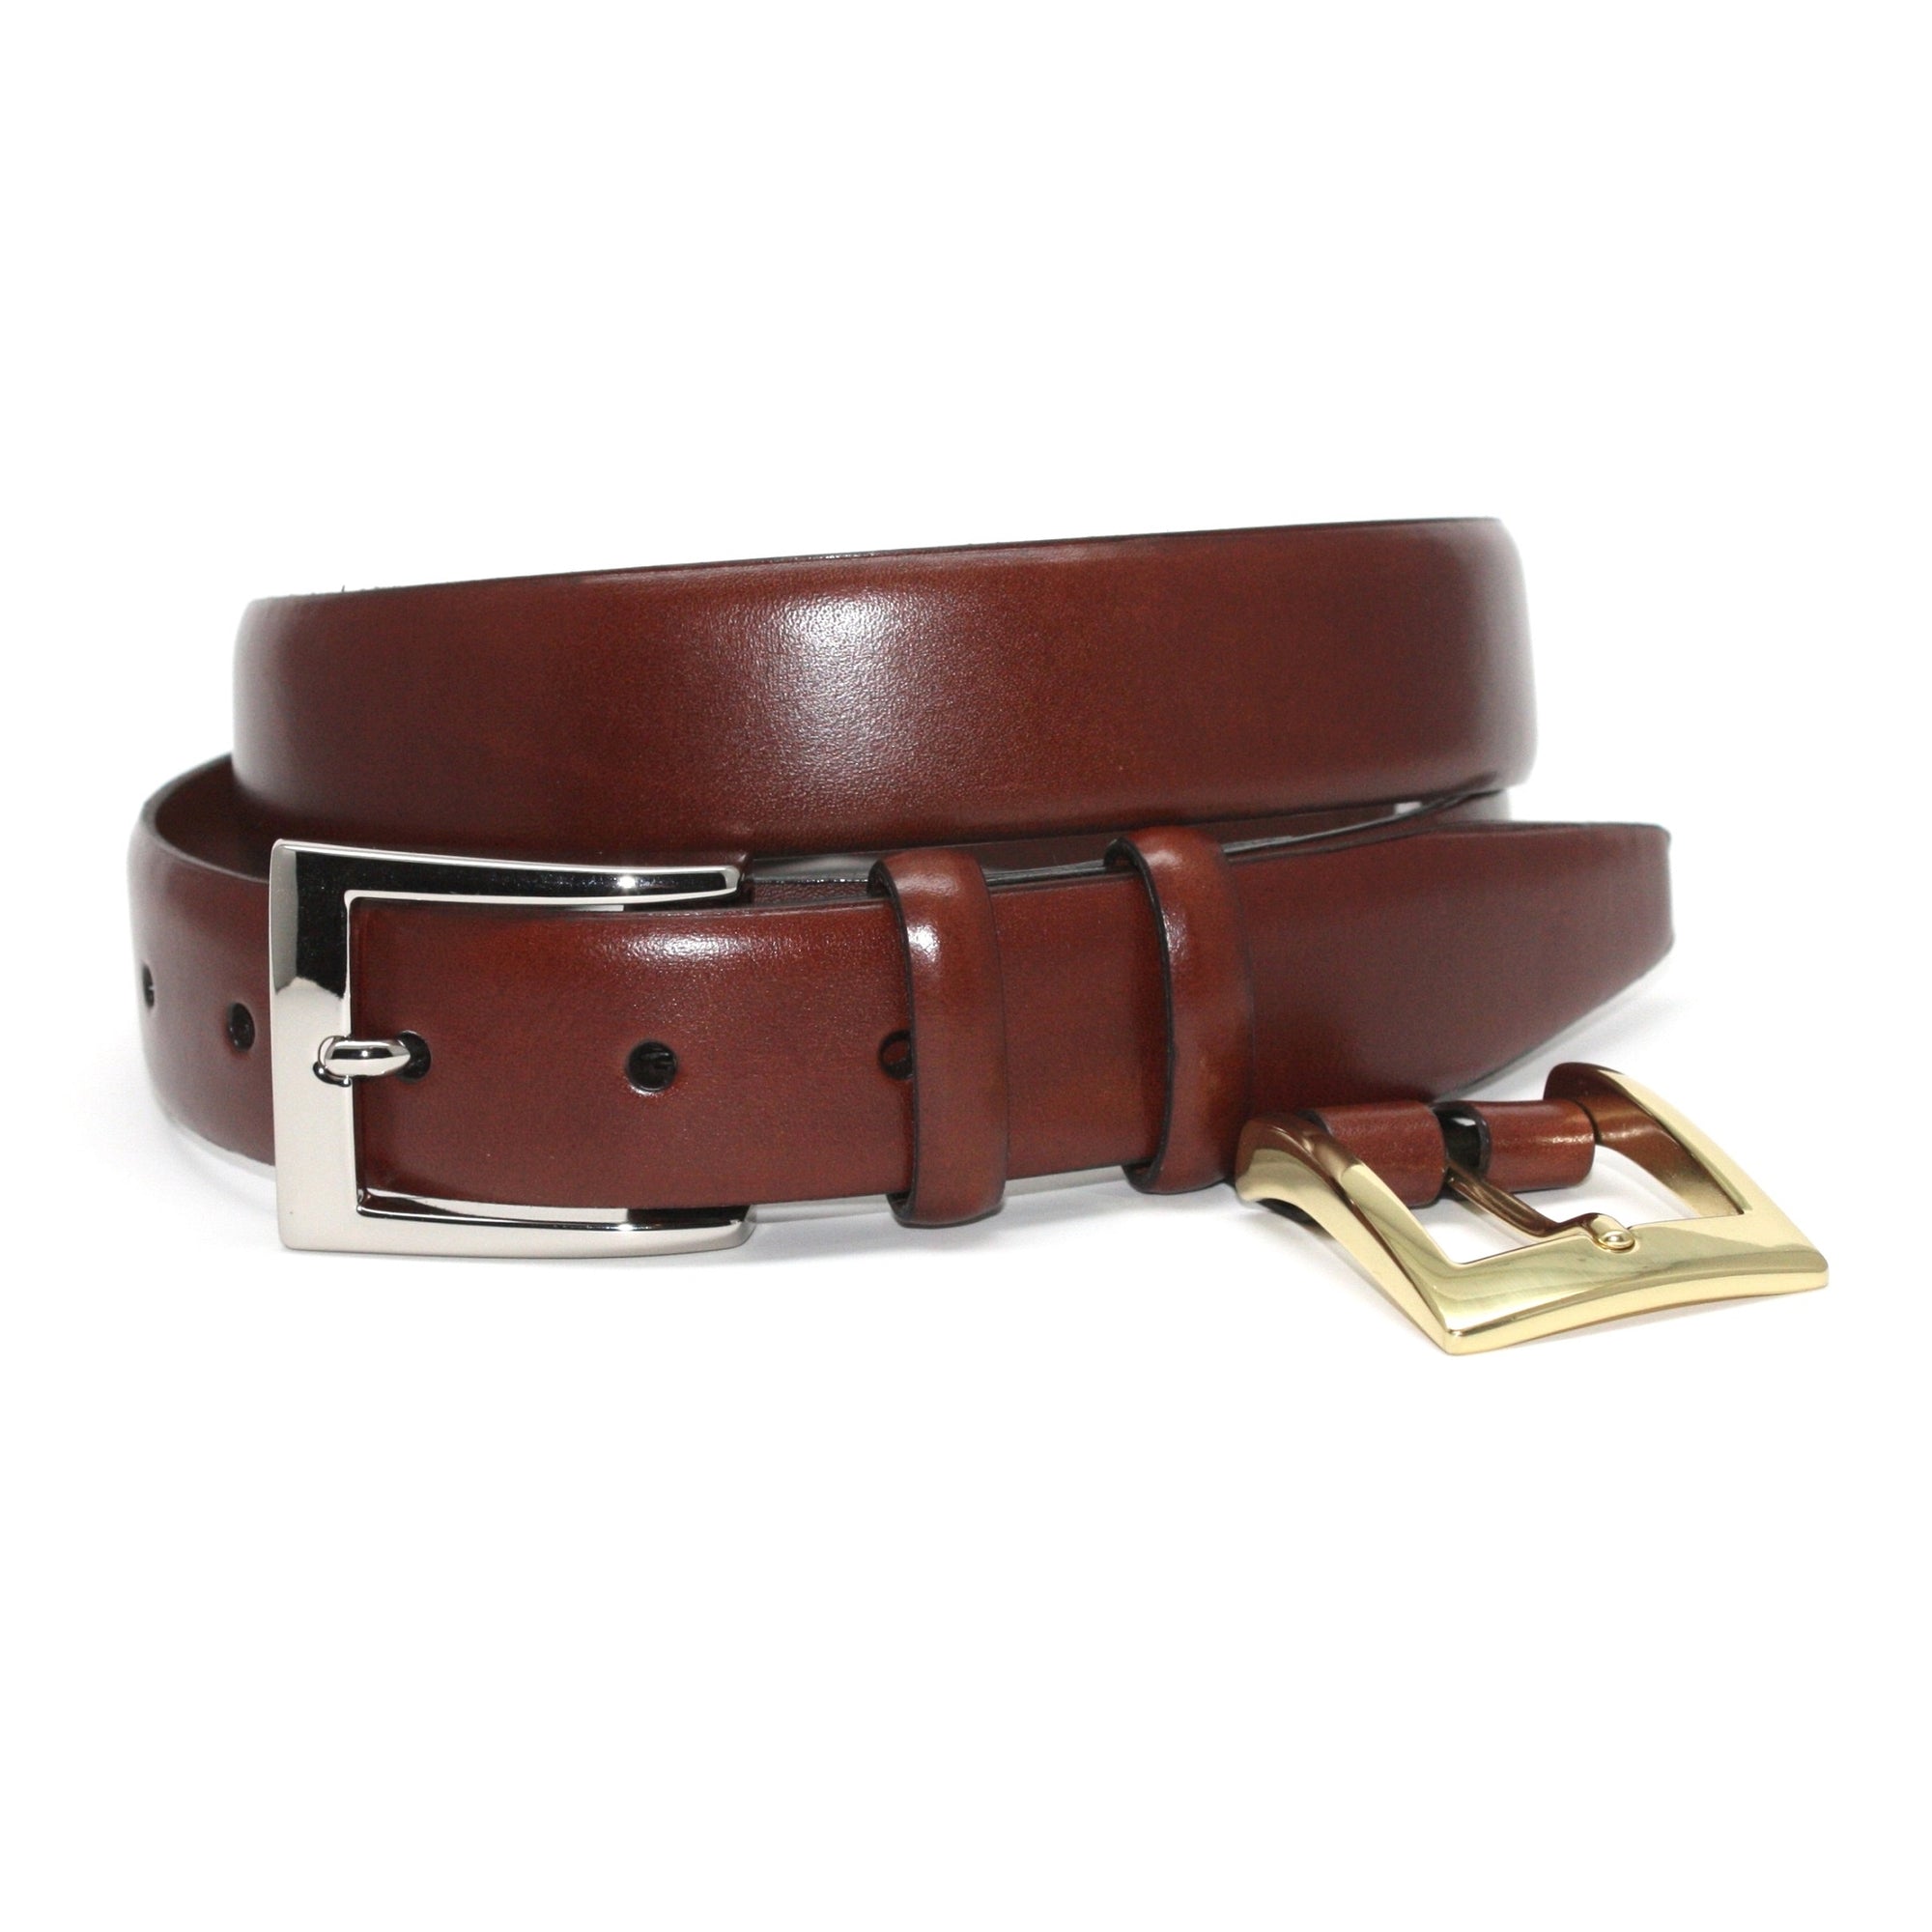 Italian Calfskin Belt with Interchangeable Buckles in Chili by Torino Leather 34